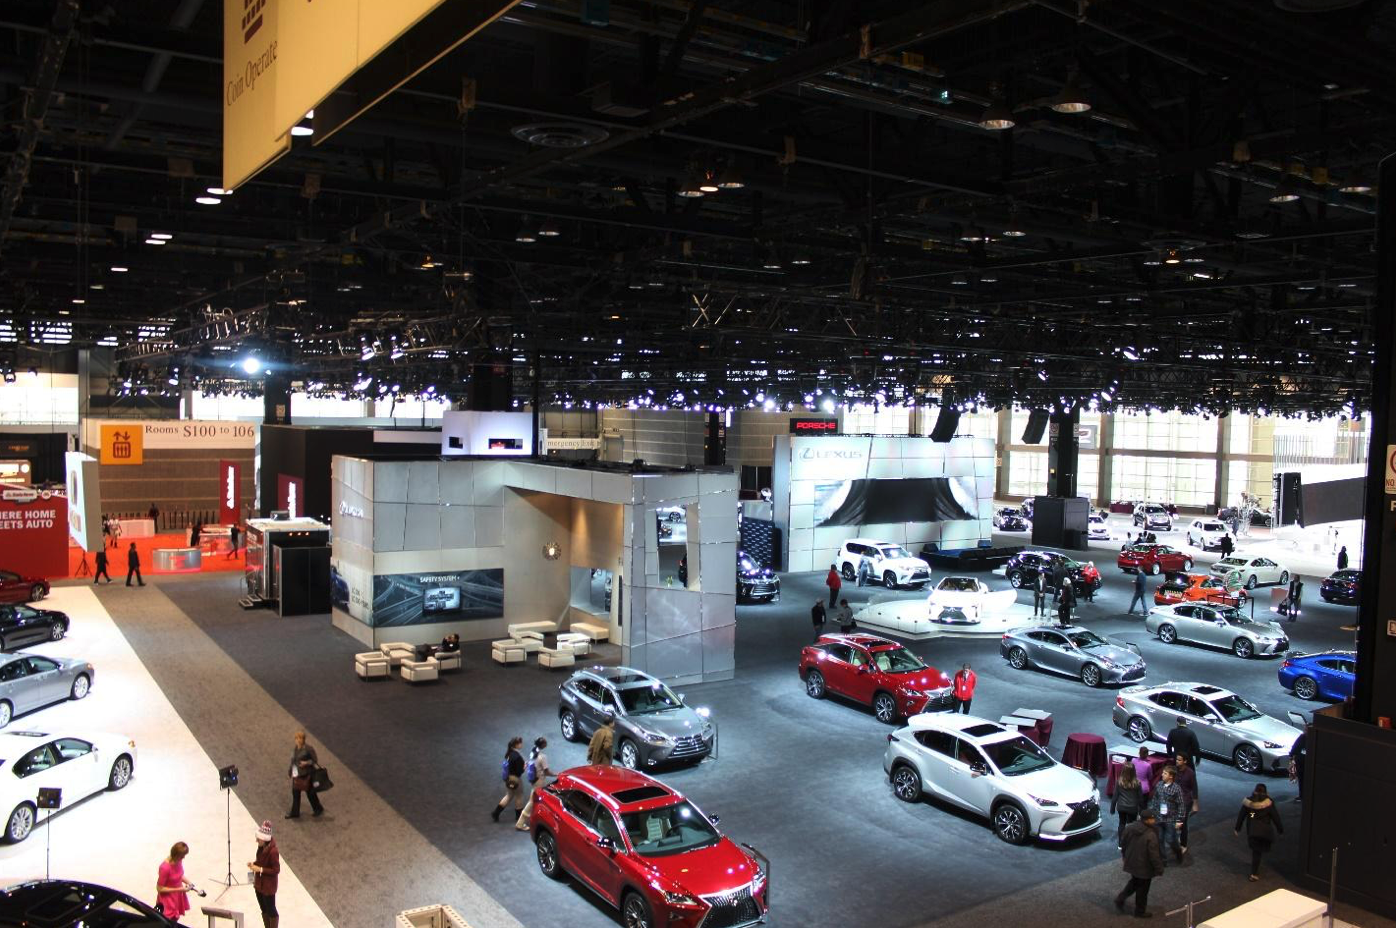 The Chicago Auto Show has approximately 1,000 vehicles on display, covering over 1 million sq. ft.